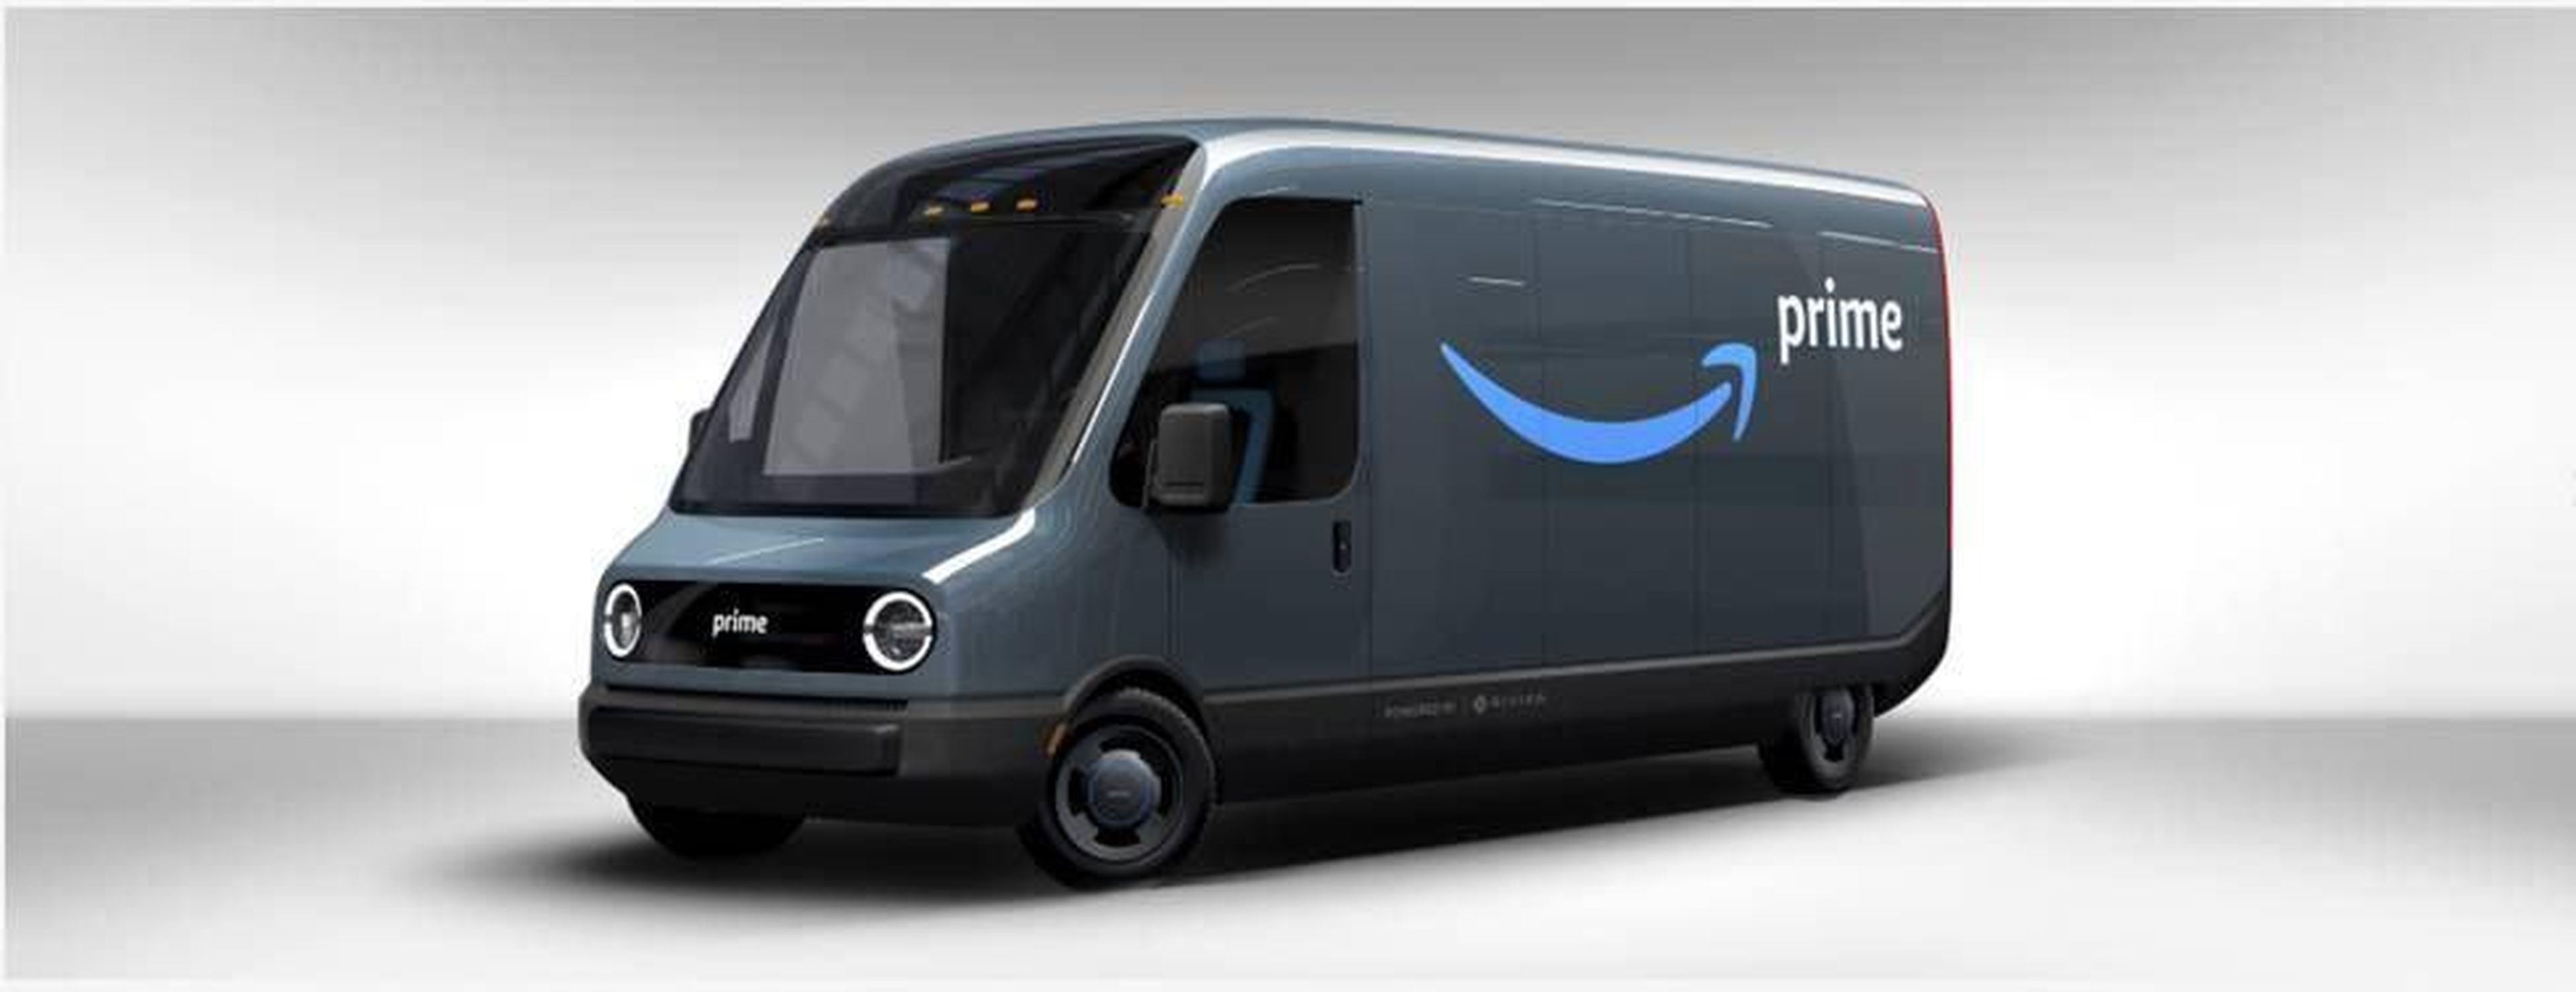 There's one segment of electric vehicles even Tesla is late to — everyone from Amazon to automakers is racing to build the perfect electric delivery van